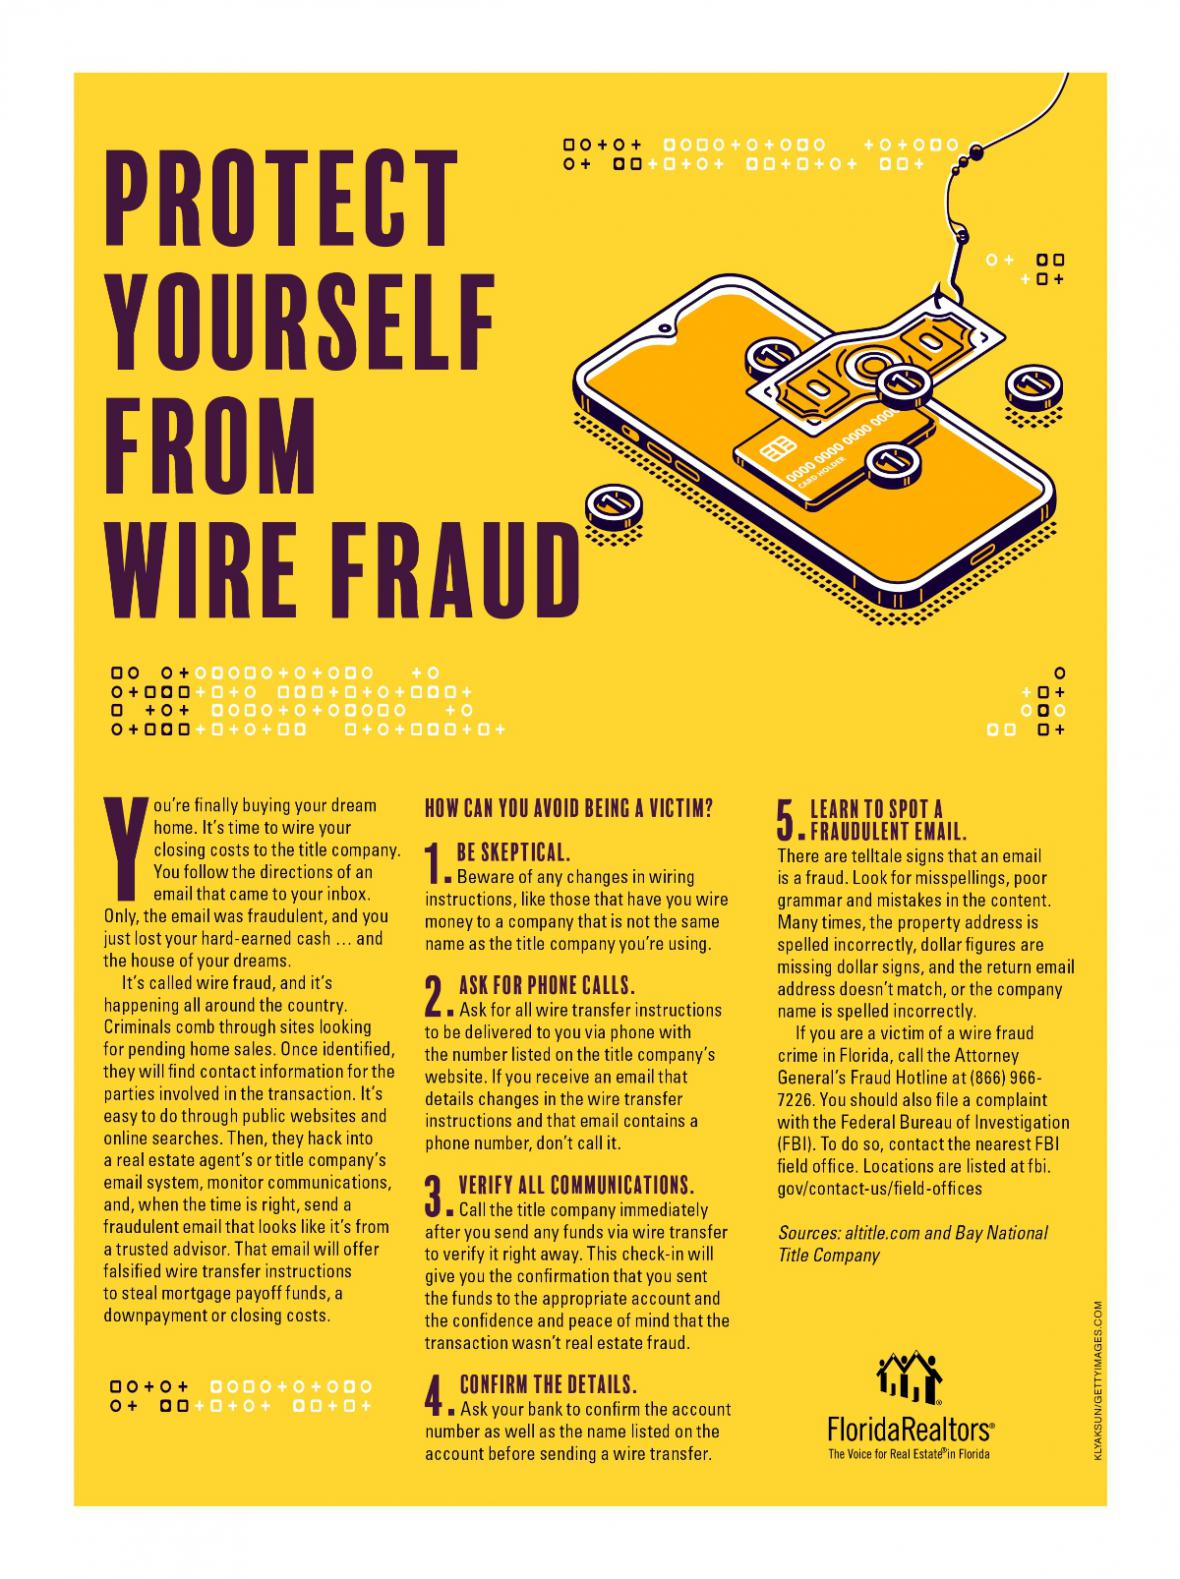 protect yourself from wire fraud infographic